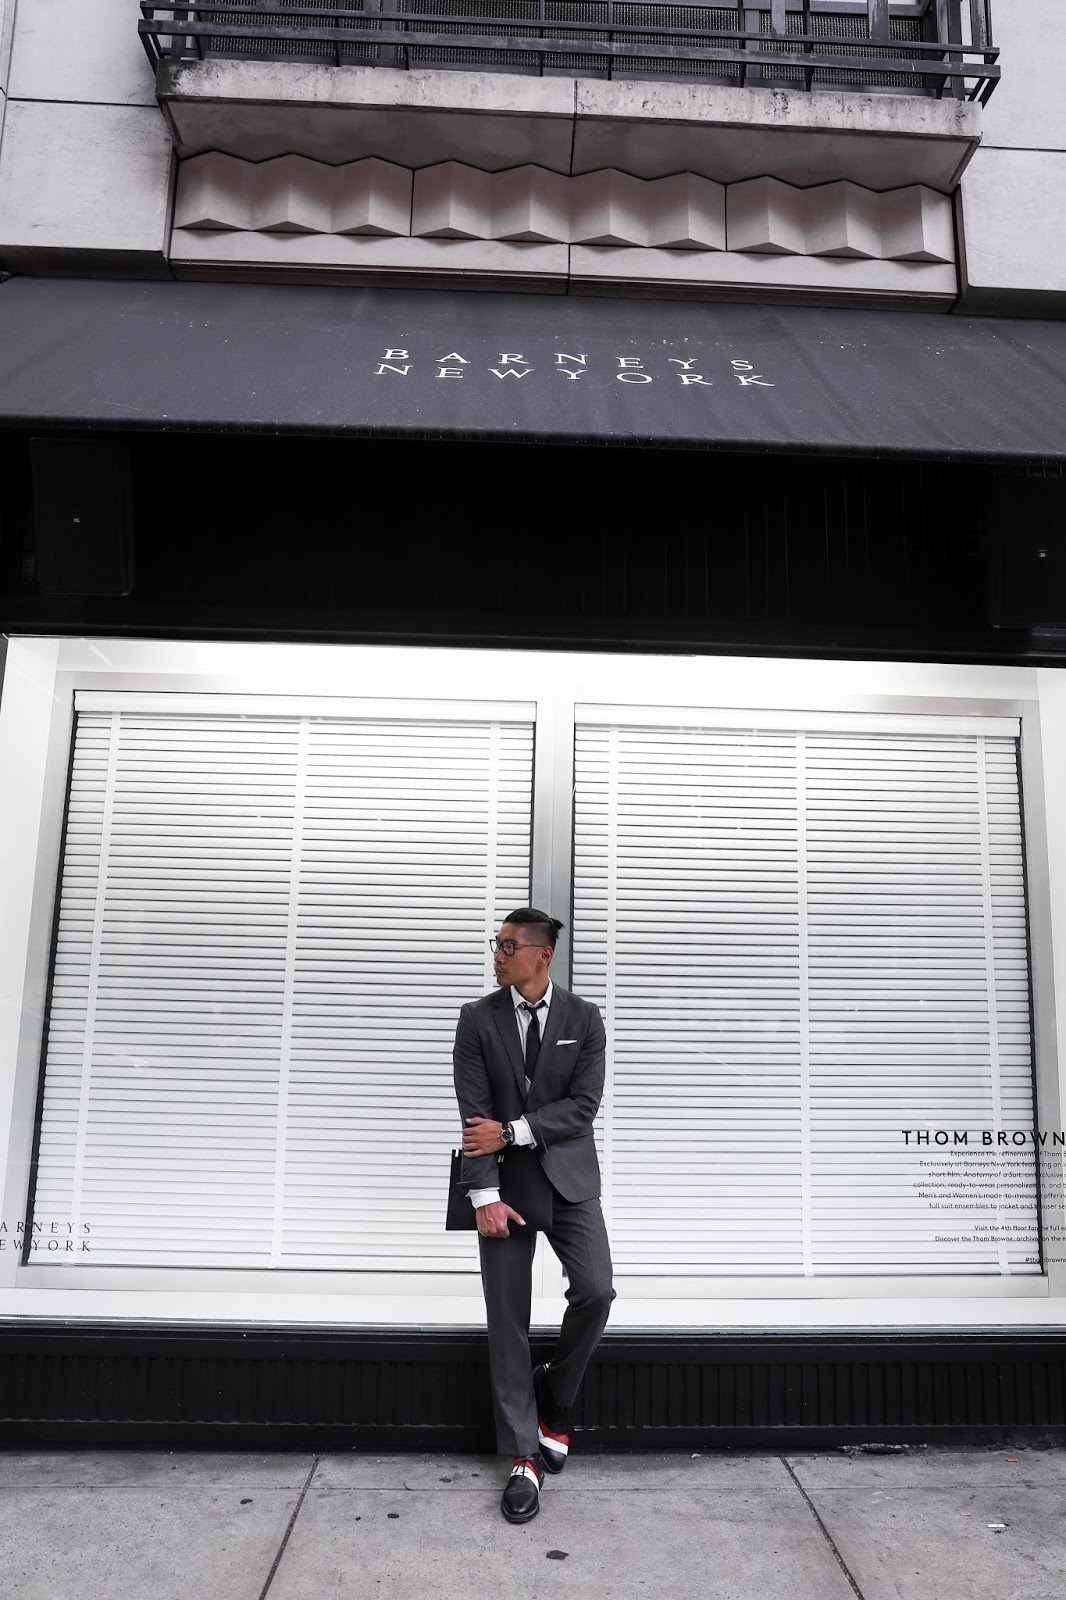 Leo Chan wearing Thom Browne outfit at Barneys | Asian Male Blogger and Model